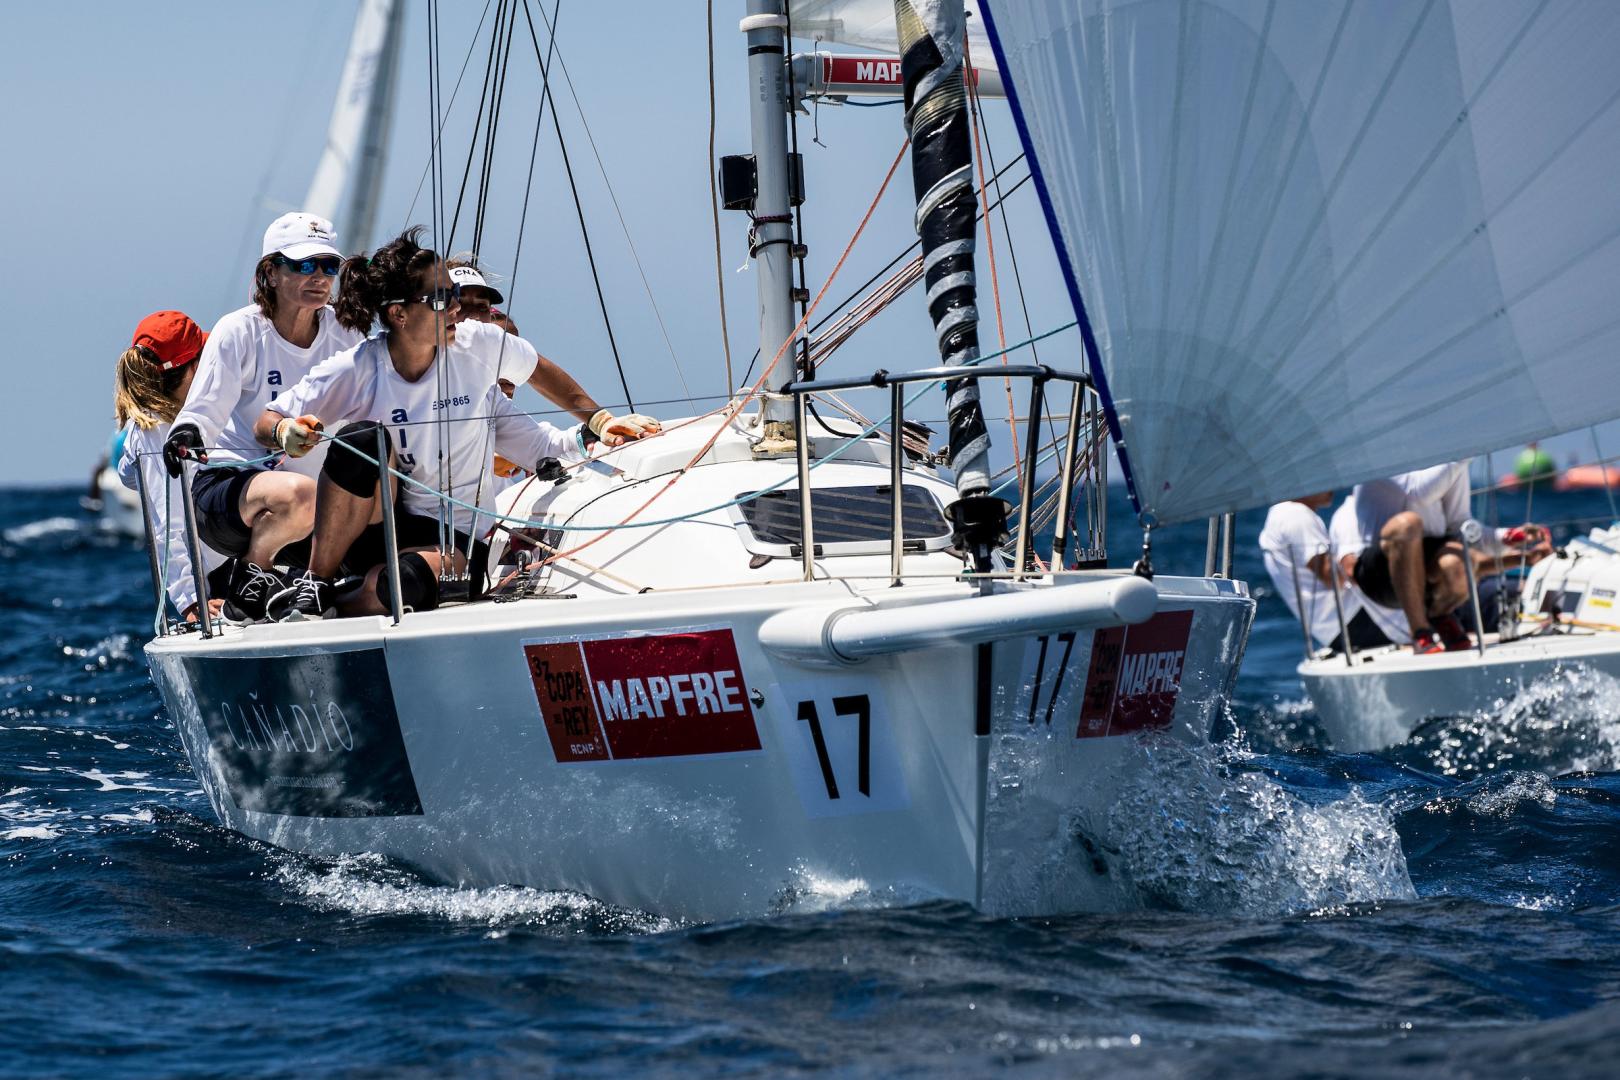 2019 is set to be a year of great changes in the Copa del Rey MAPFRE